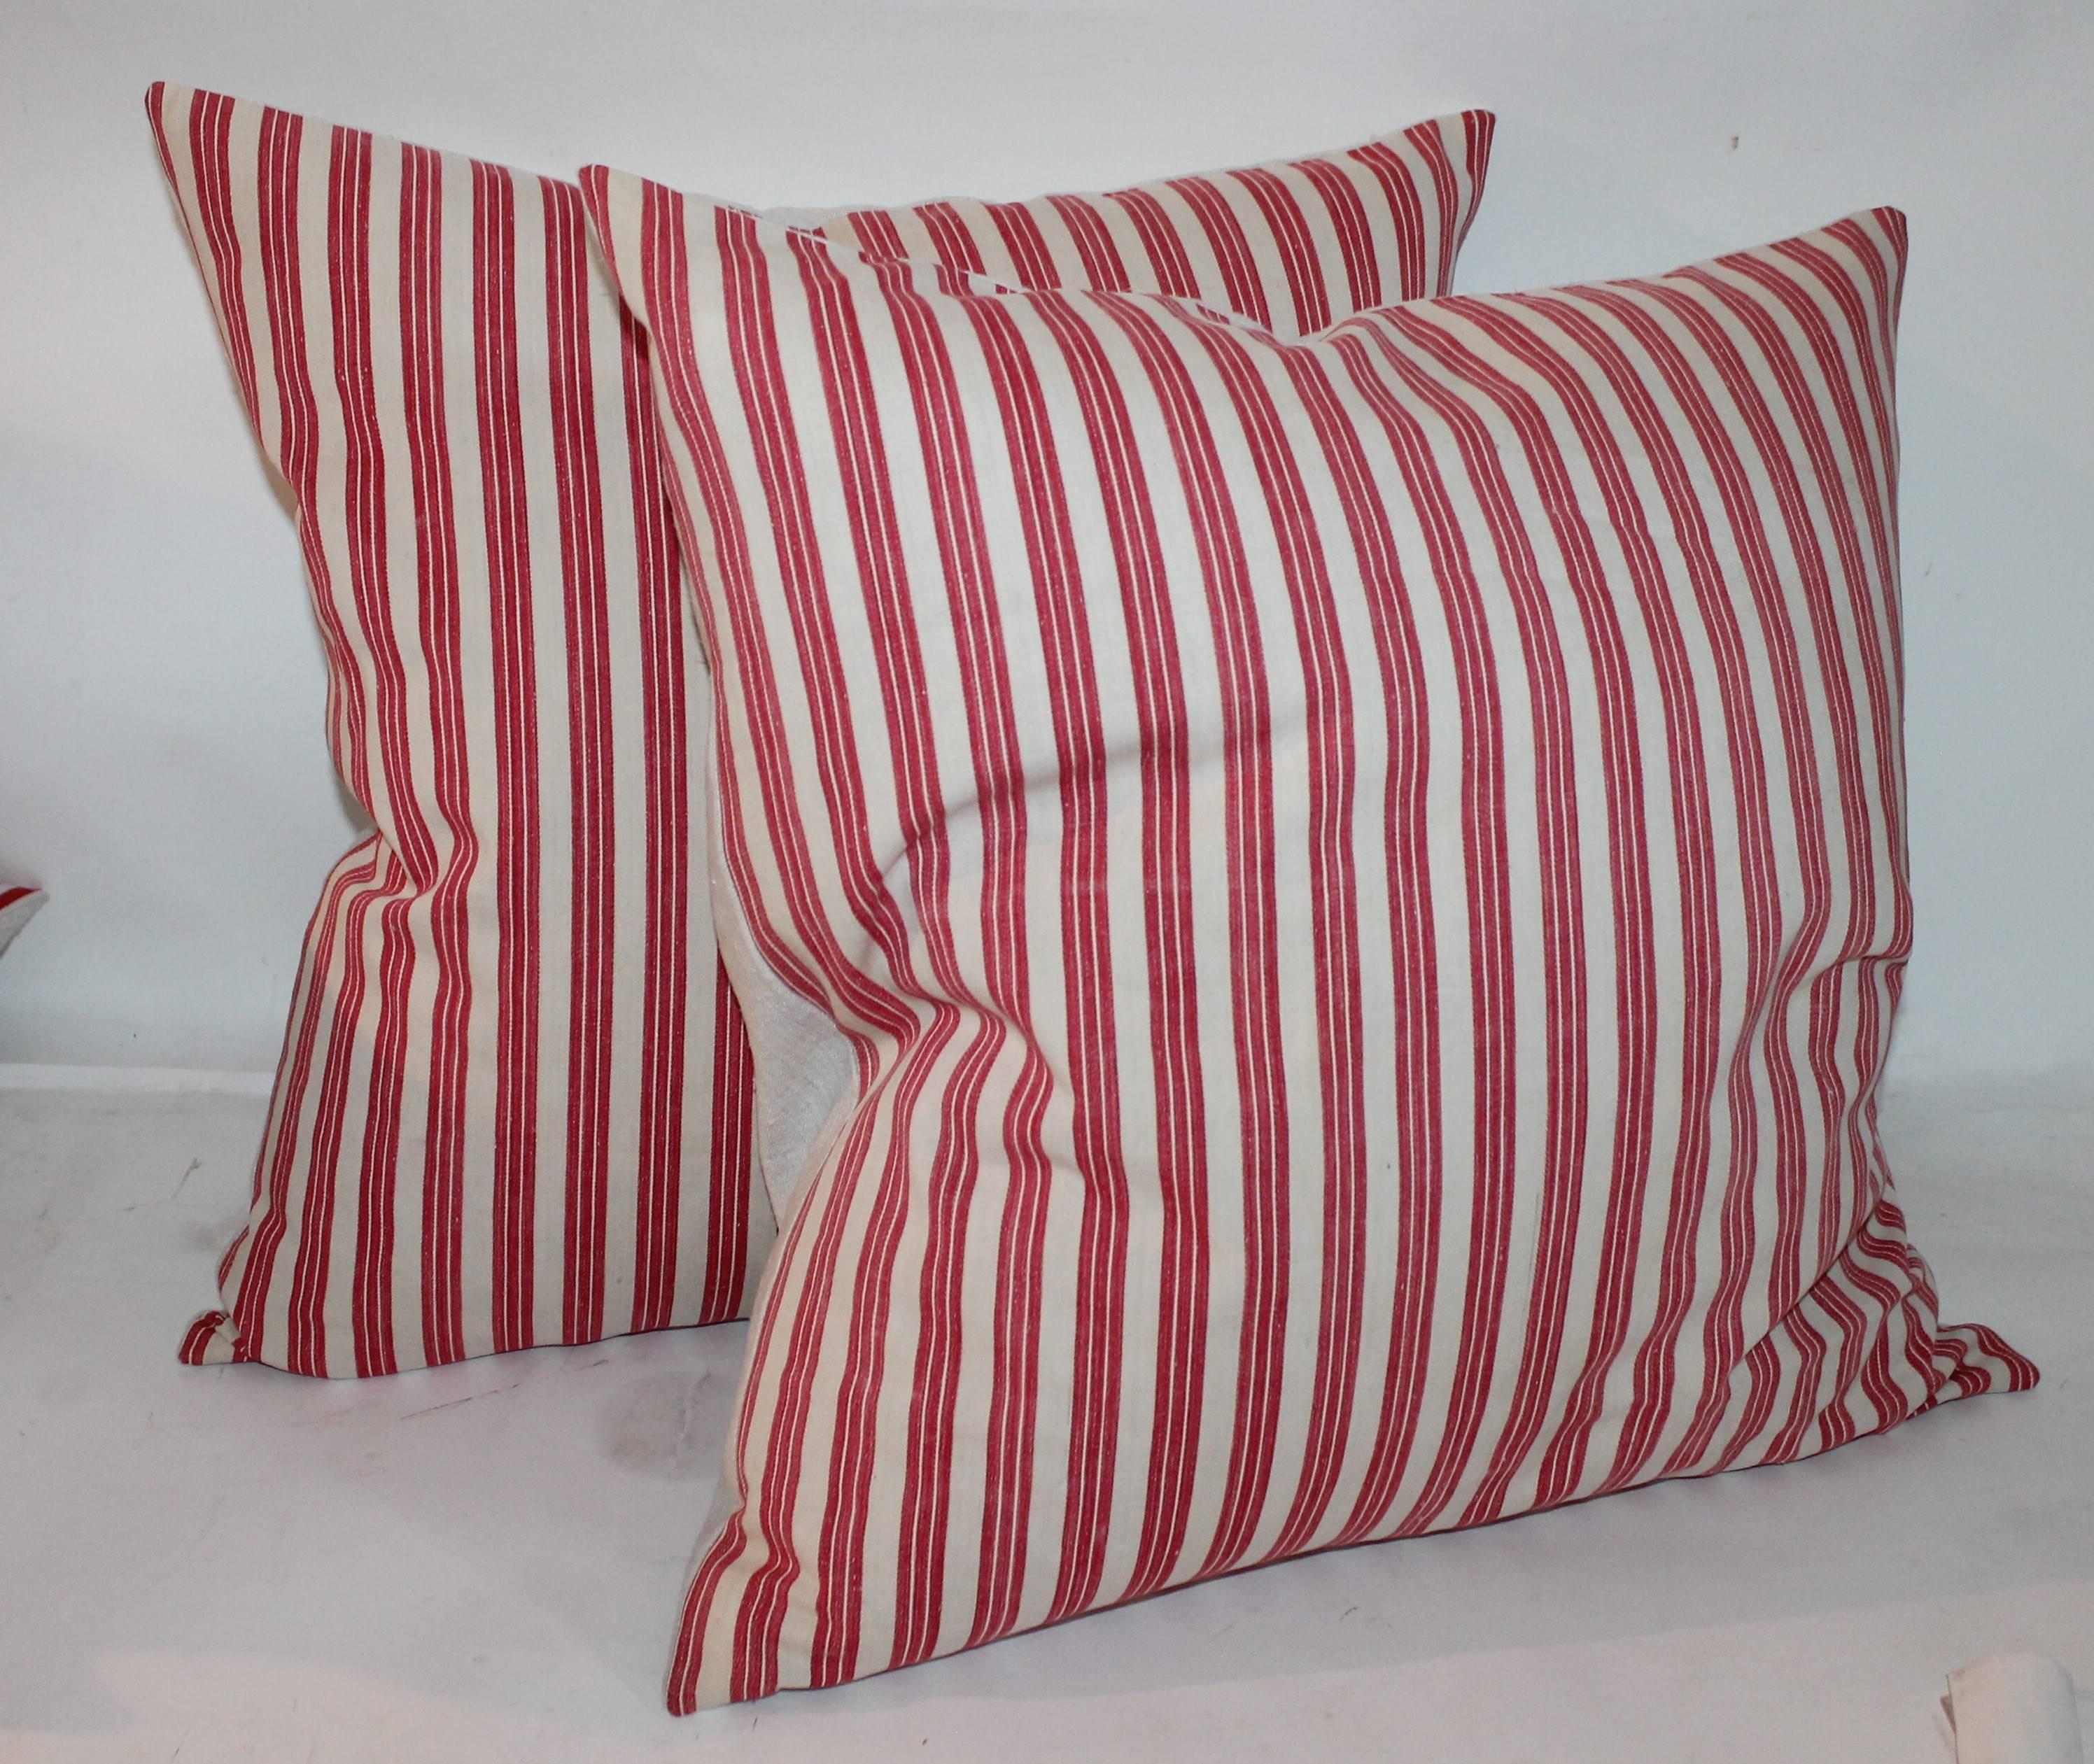 These red and white stripe ticking pillows are in fine condition. They come in sizes 20 x 20 and in 22 x 22. Four pairs in stock.